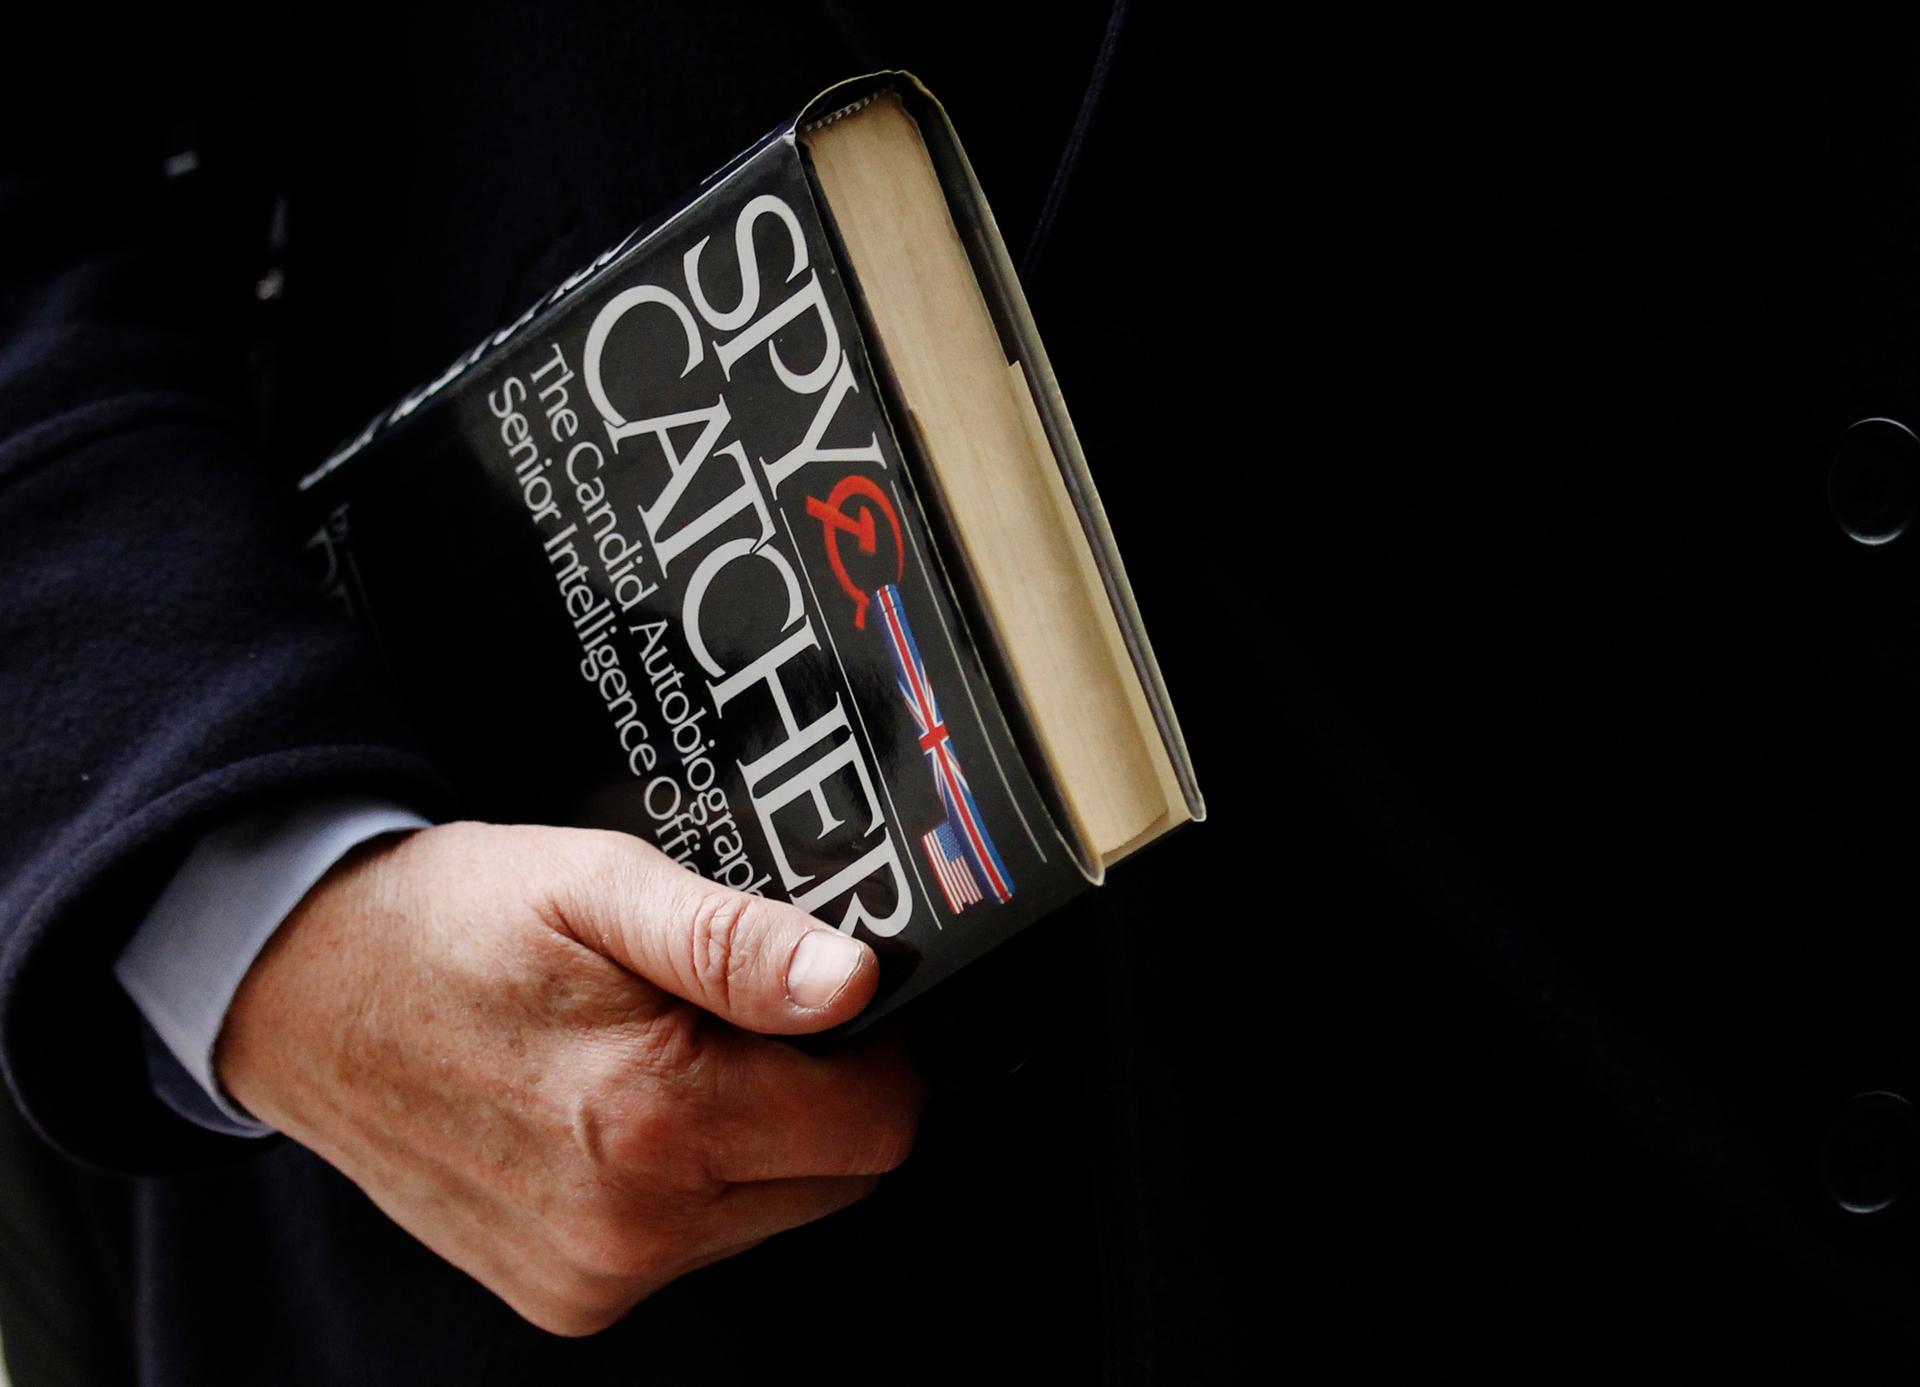 Guardian Editor Alan Rusbridger carries a copy of the book Spy Catcher as he arrives at Parliament to face questions over his publication of intelligence files from Edward Snowden.